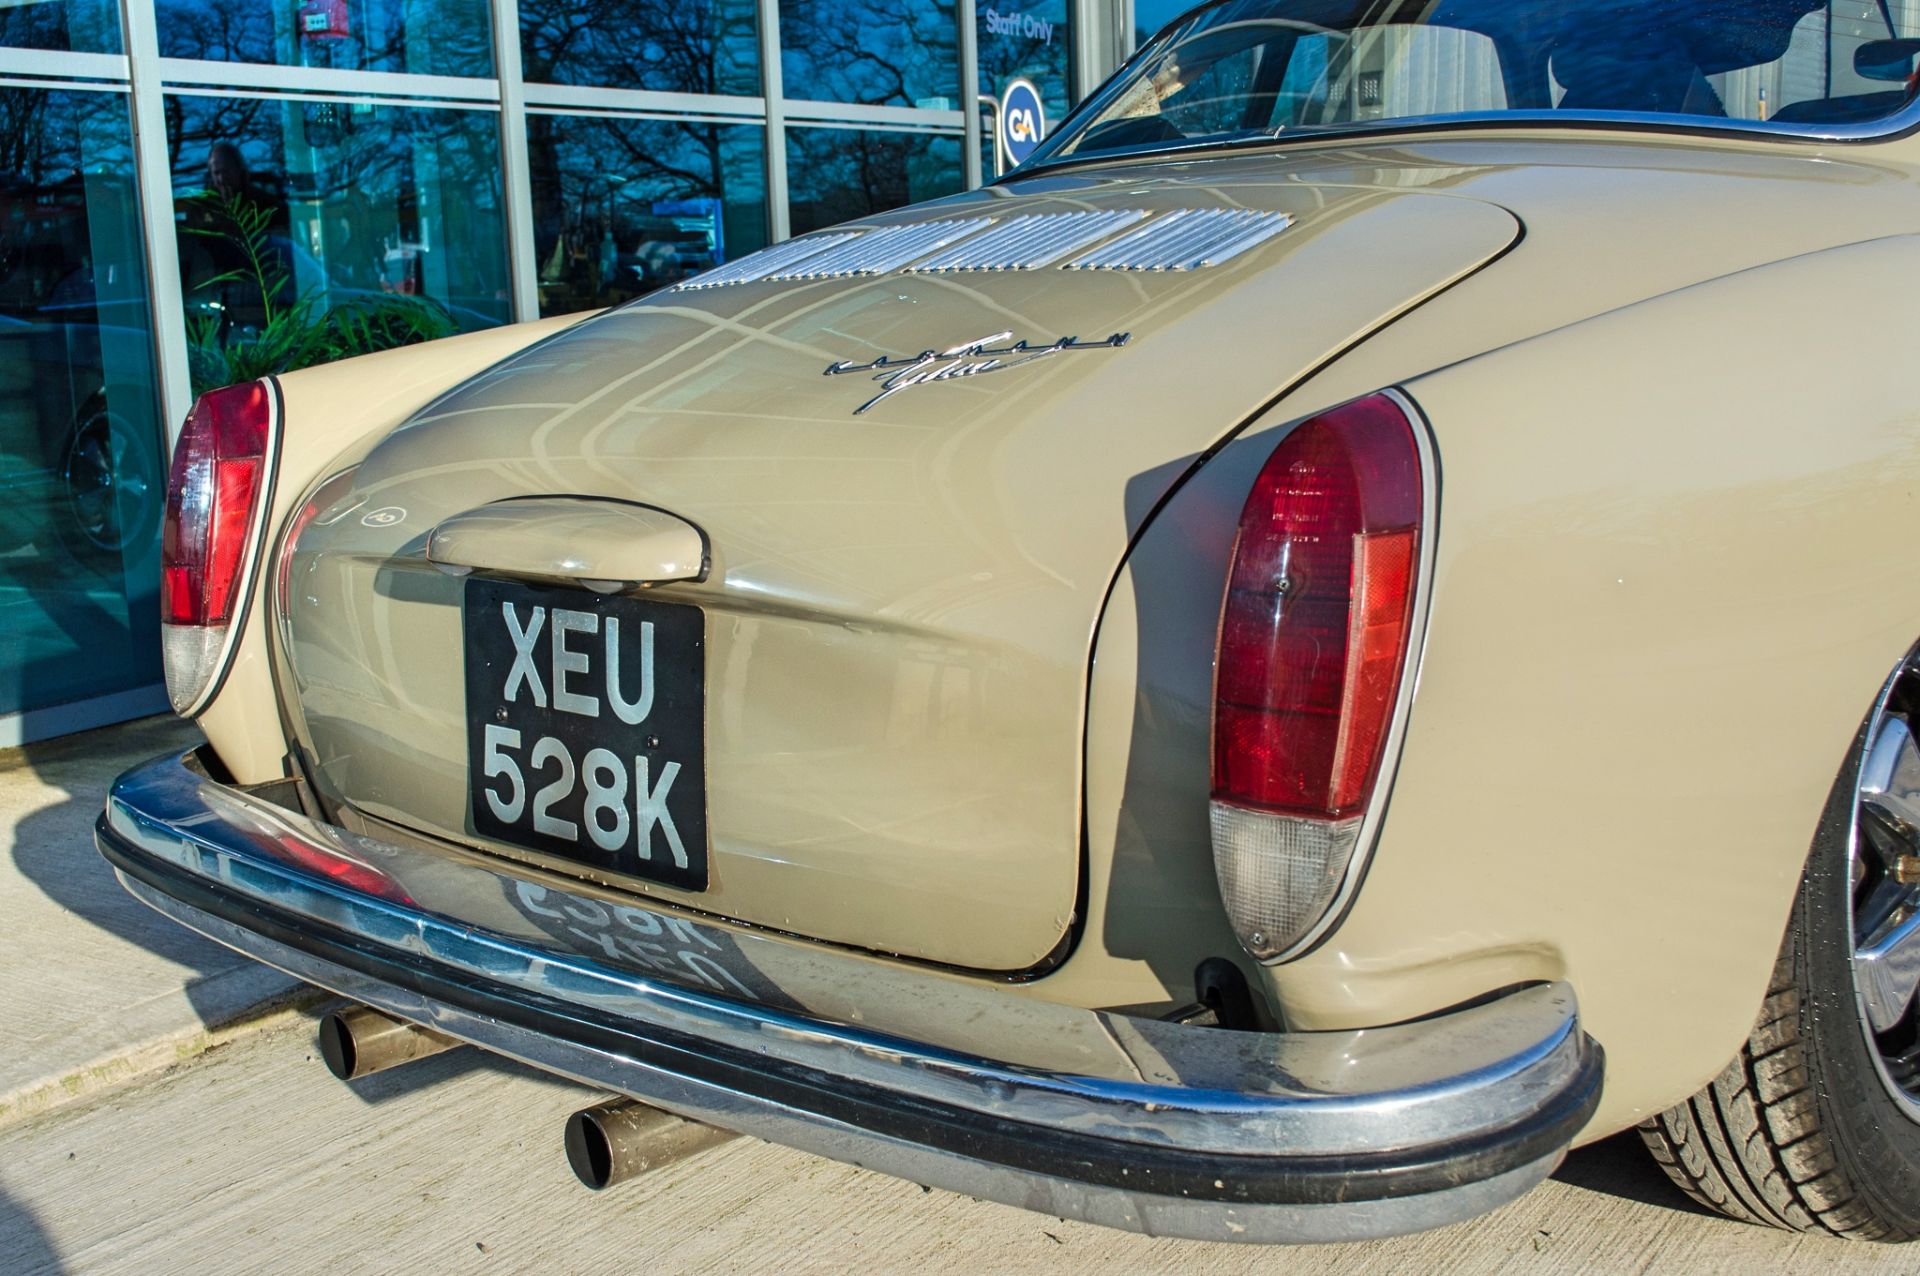 1972 Volkswagen Karmann Ghia 1641cc two door coupe - Image 19 of 52